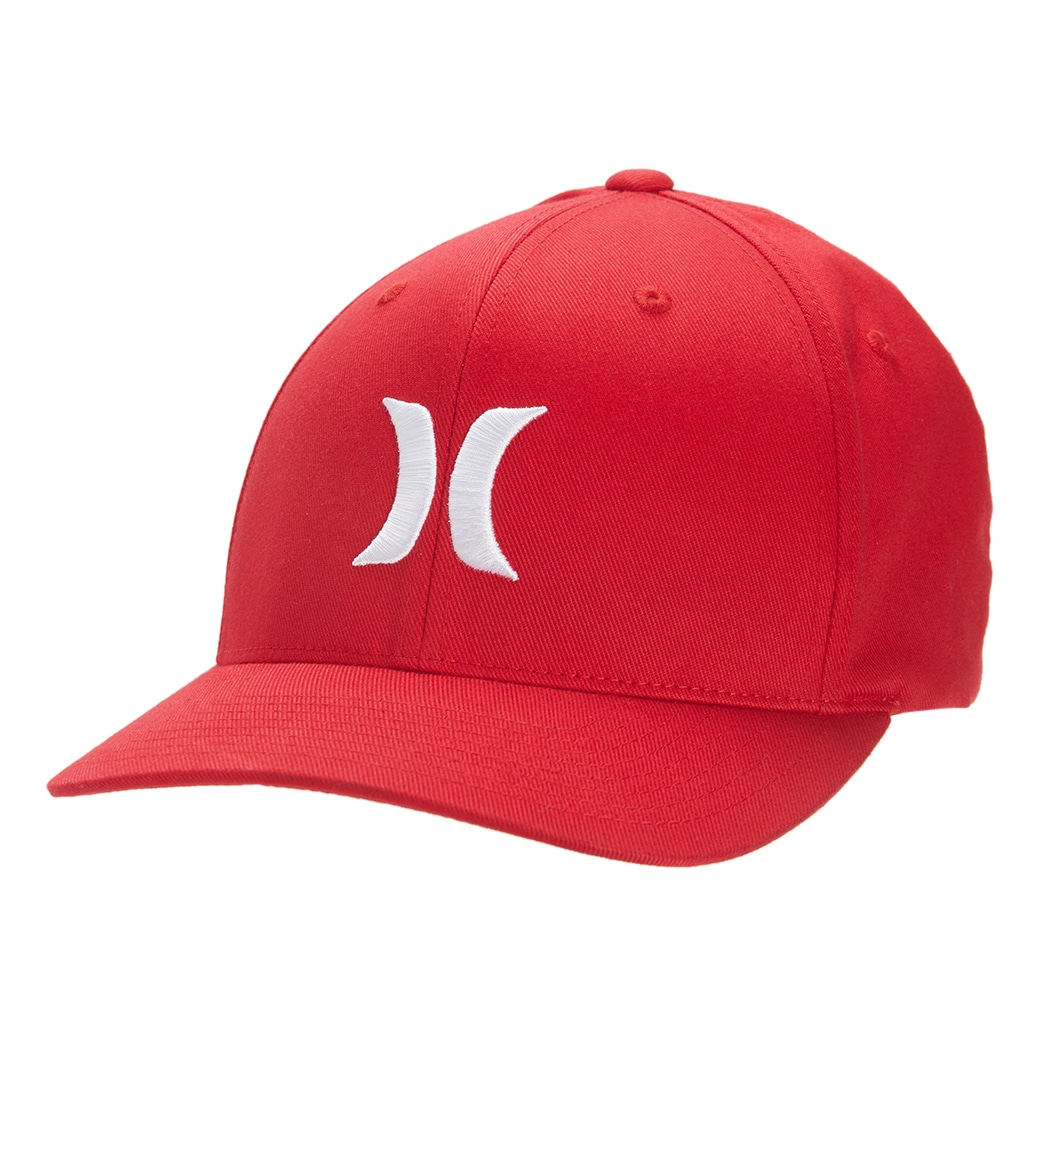 Hurley Men's One And Only Hat - Red Large/Xl Cotton/Polyester - Swimoutlet.com